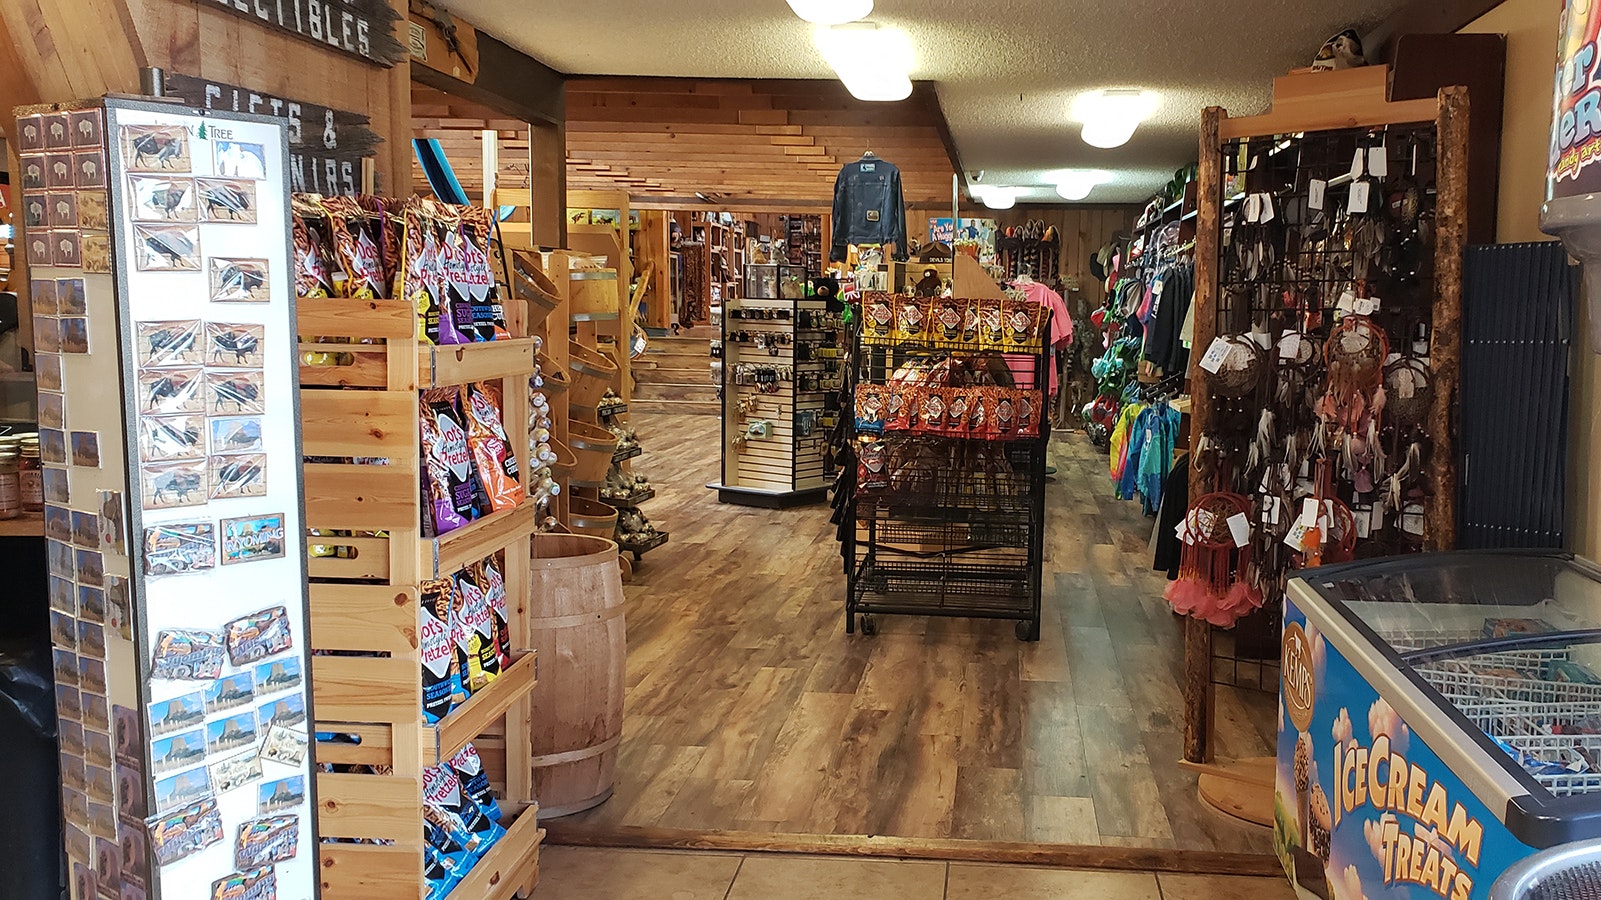 A gift shop offers a range of camping necessities and souvenirs, as well as ice cream and fudge.